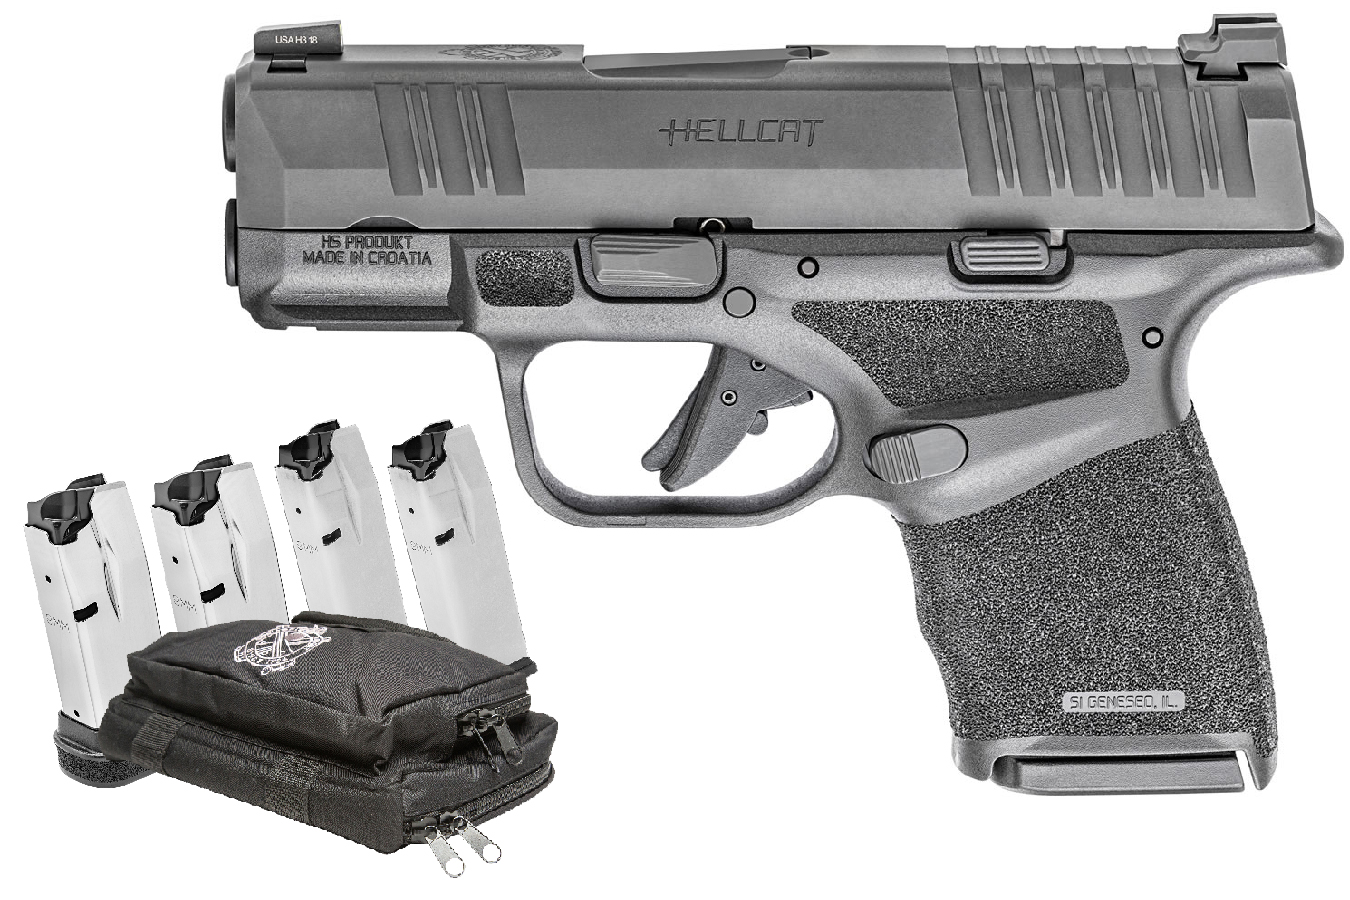 No. 24 Best Selling: SPRINGFIELD 9MM HELLCAT MICRO COMPACT 3` GEAR UP